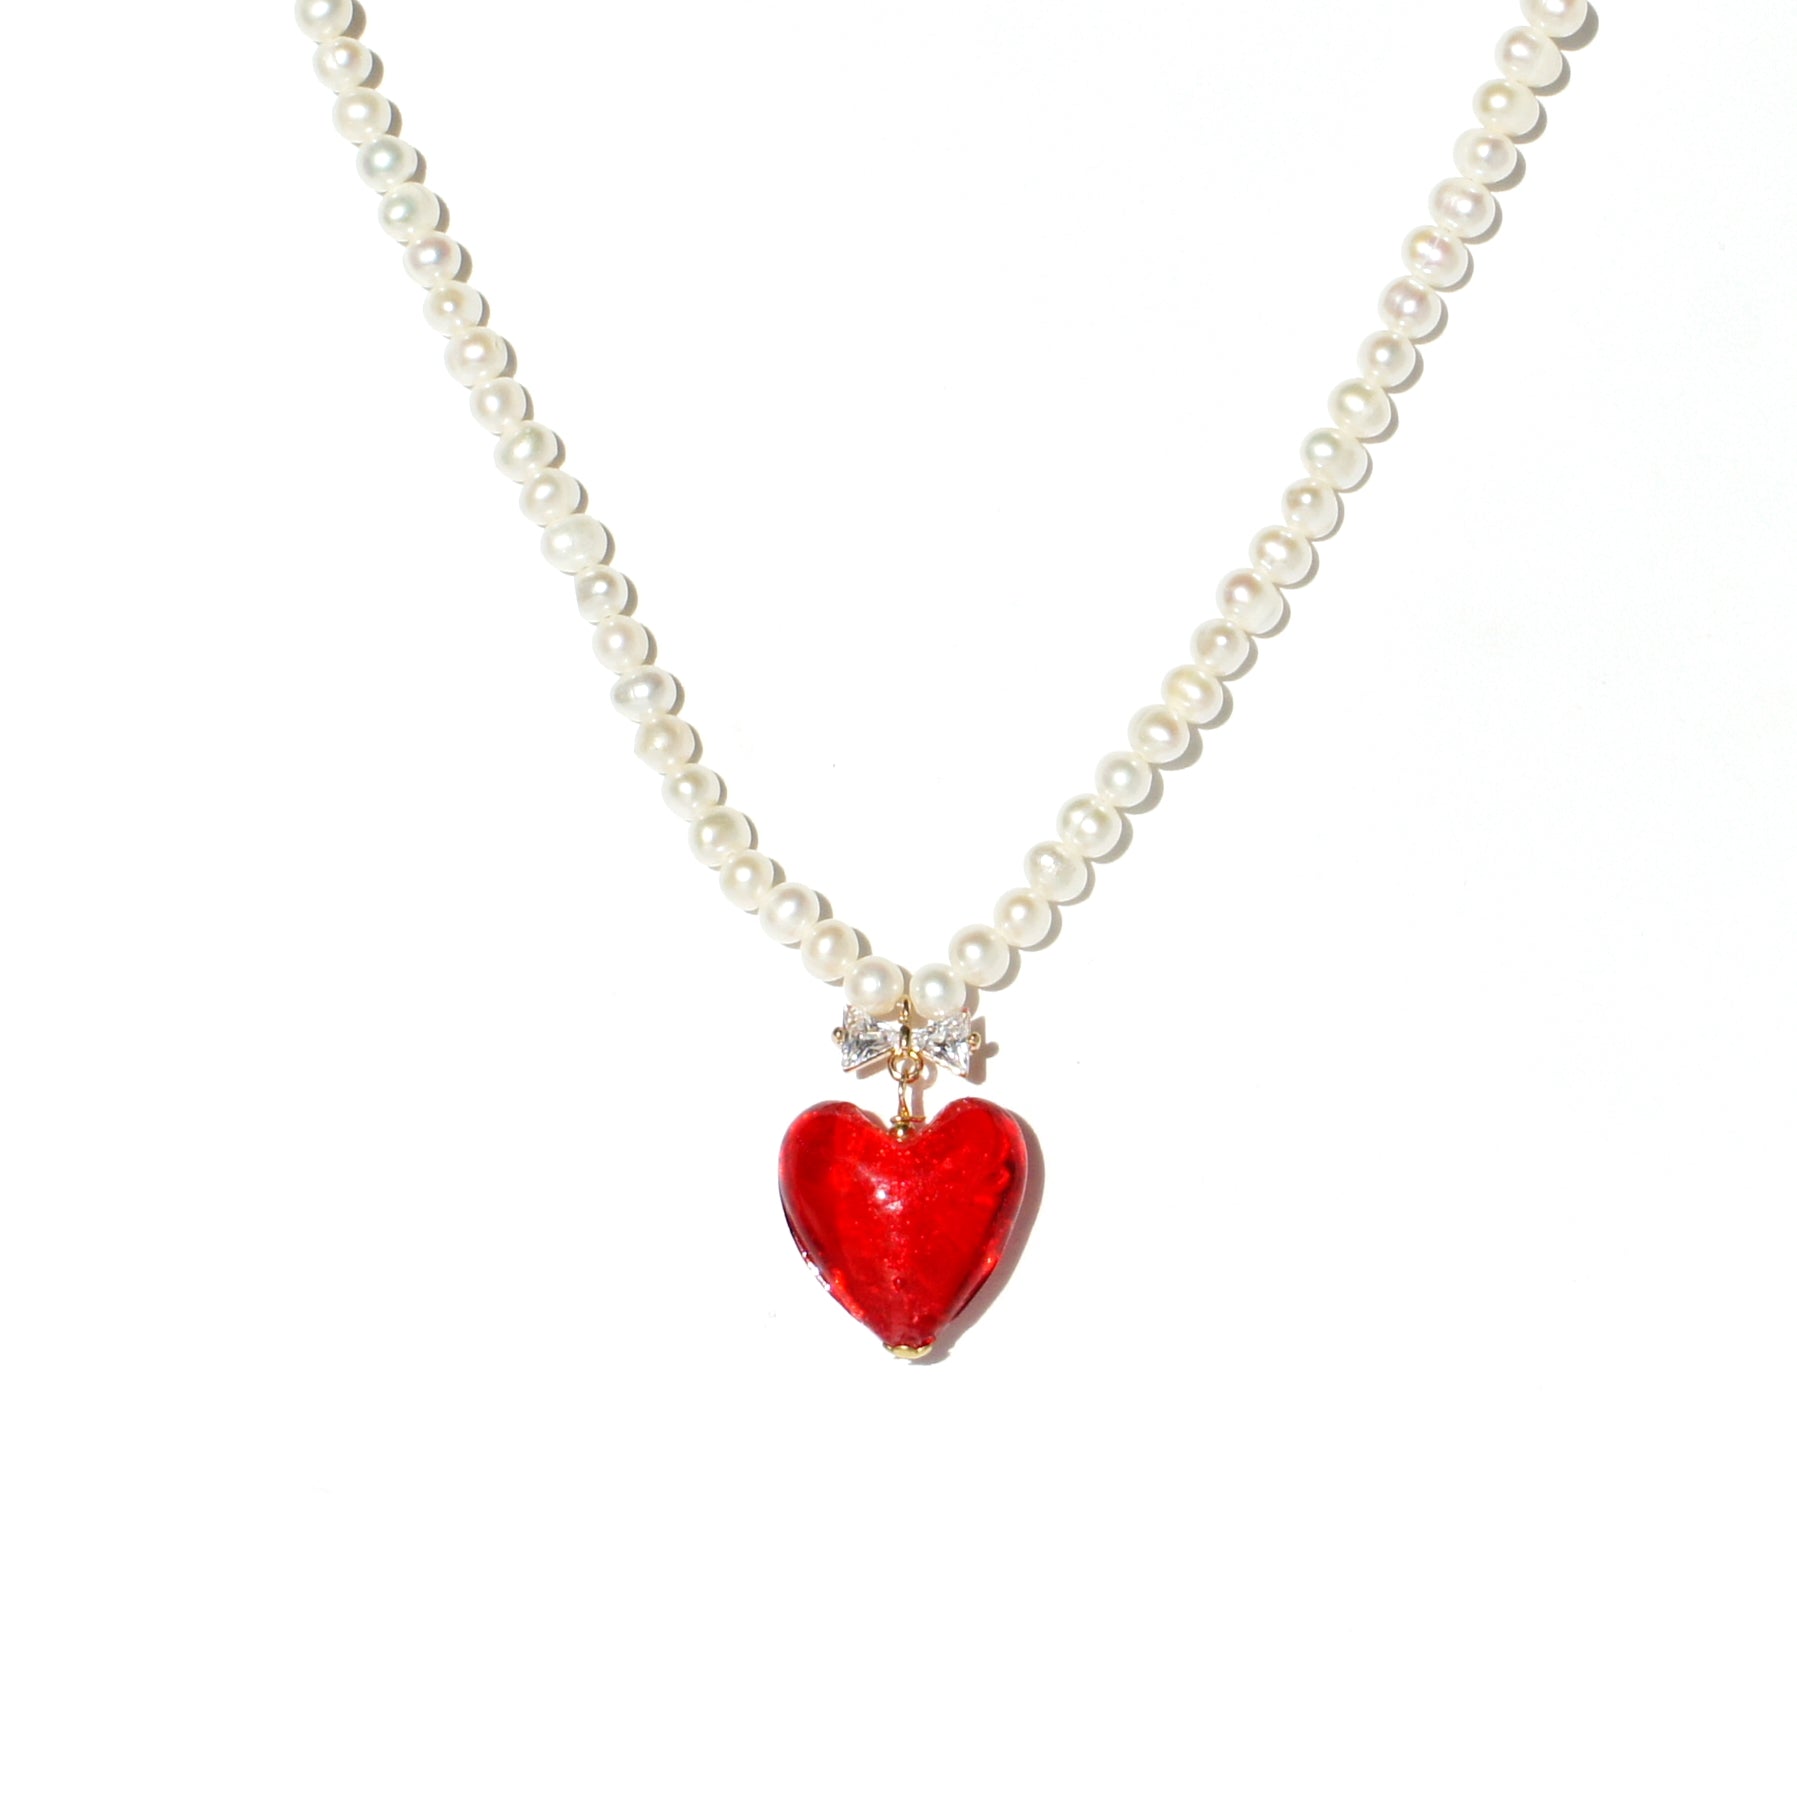 Whisper of Heart Freshwater Pearl Necklace with Crystal Bow and Heart Pendant